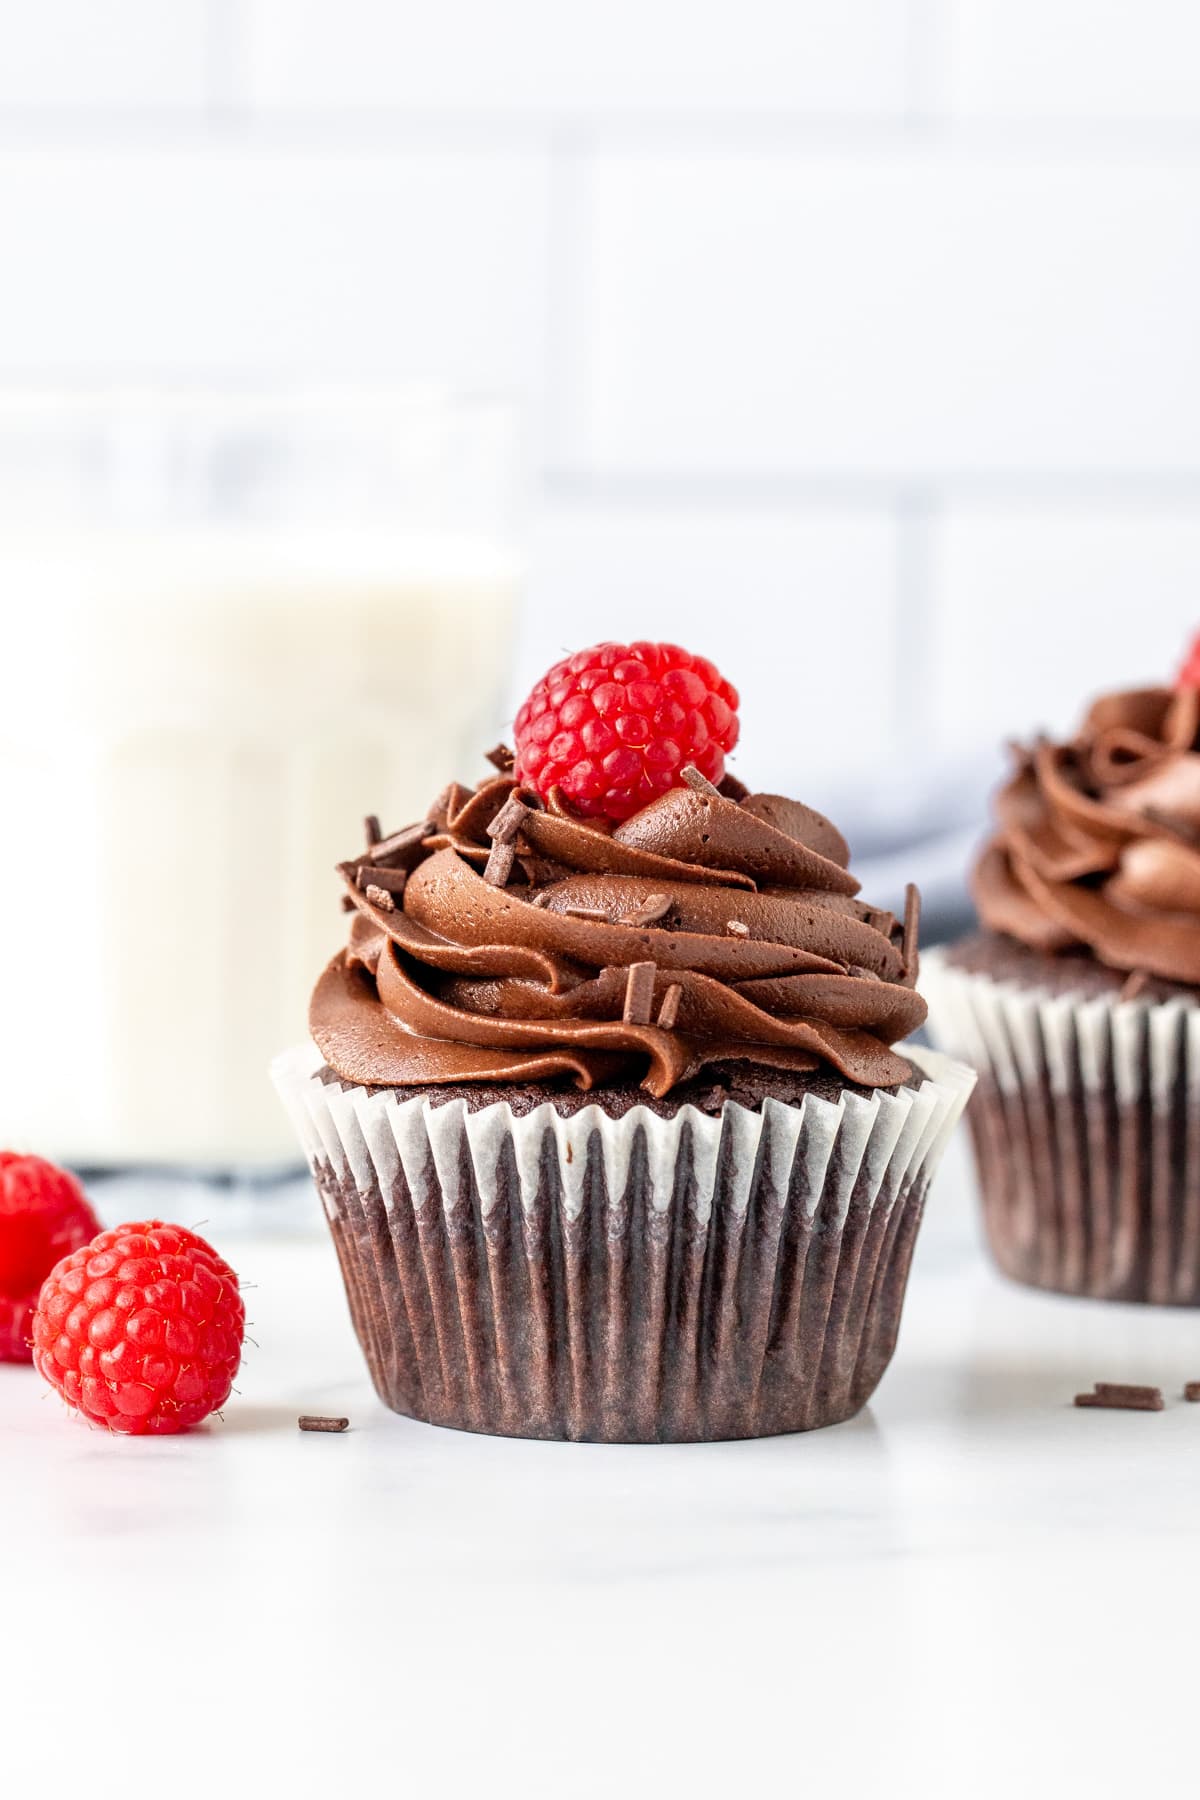 Chocolate cupcake with chocolate frosting and a raspberry on top with glass of milk